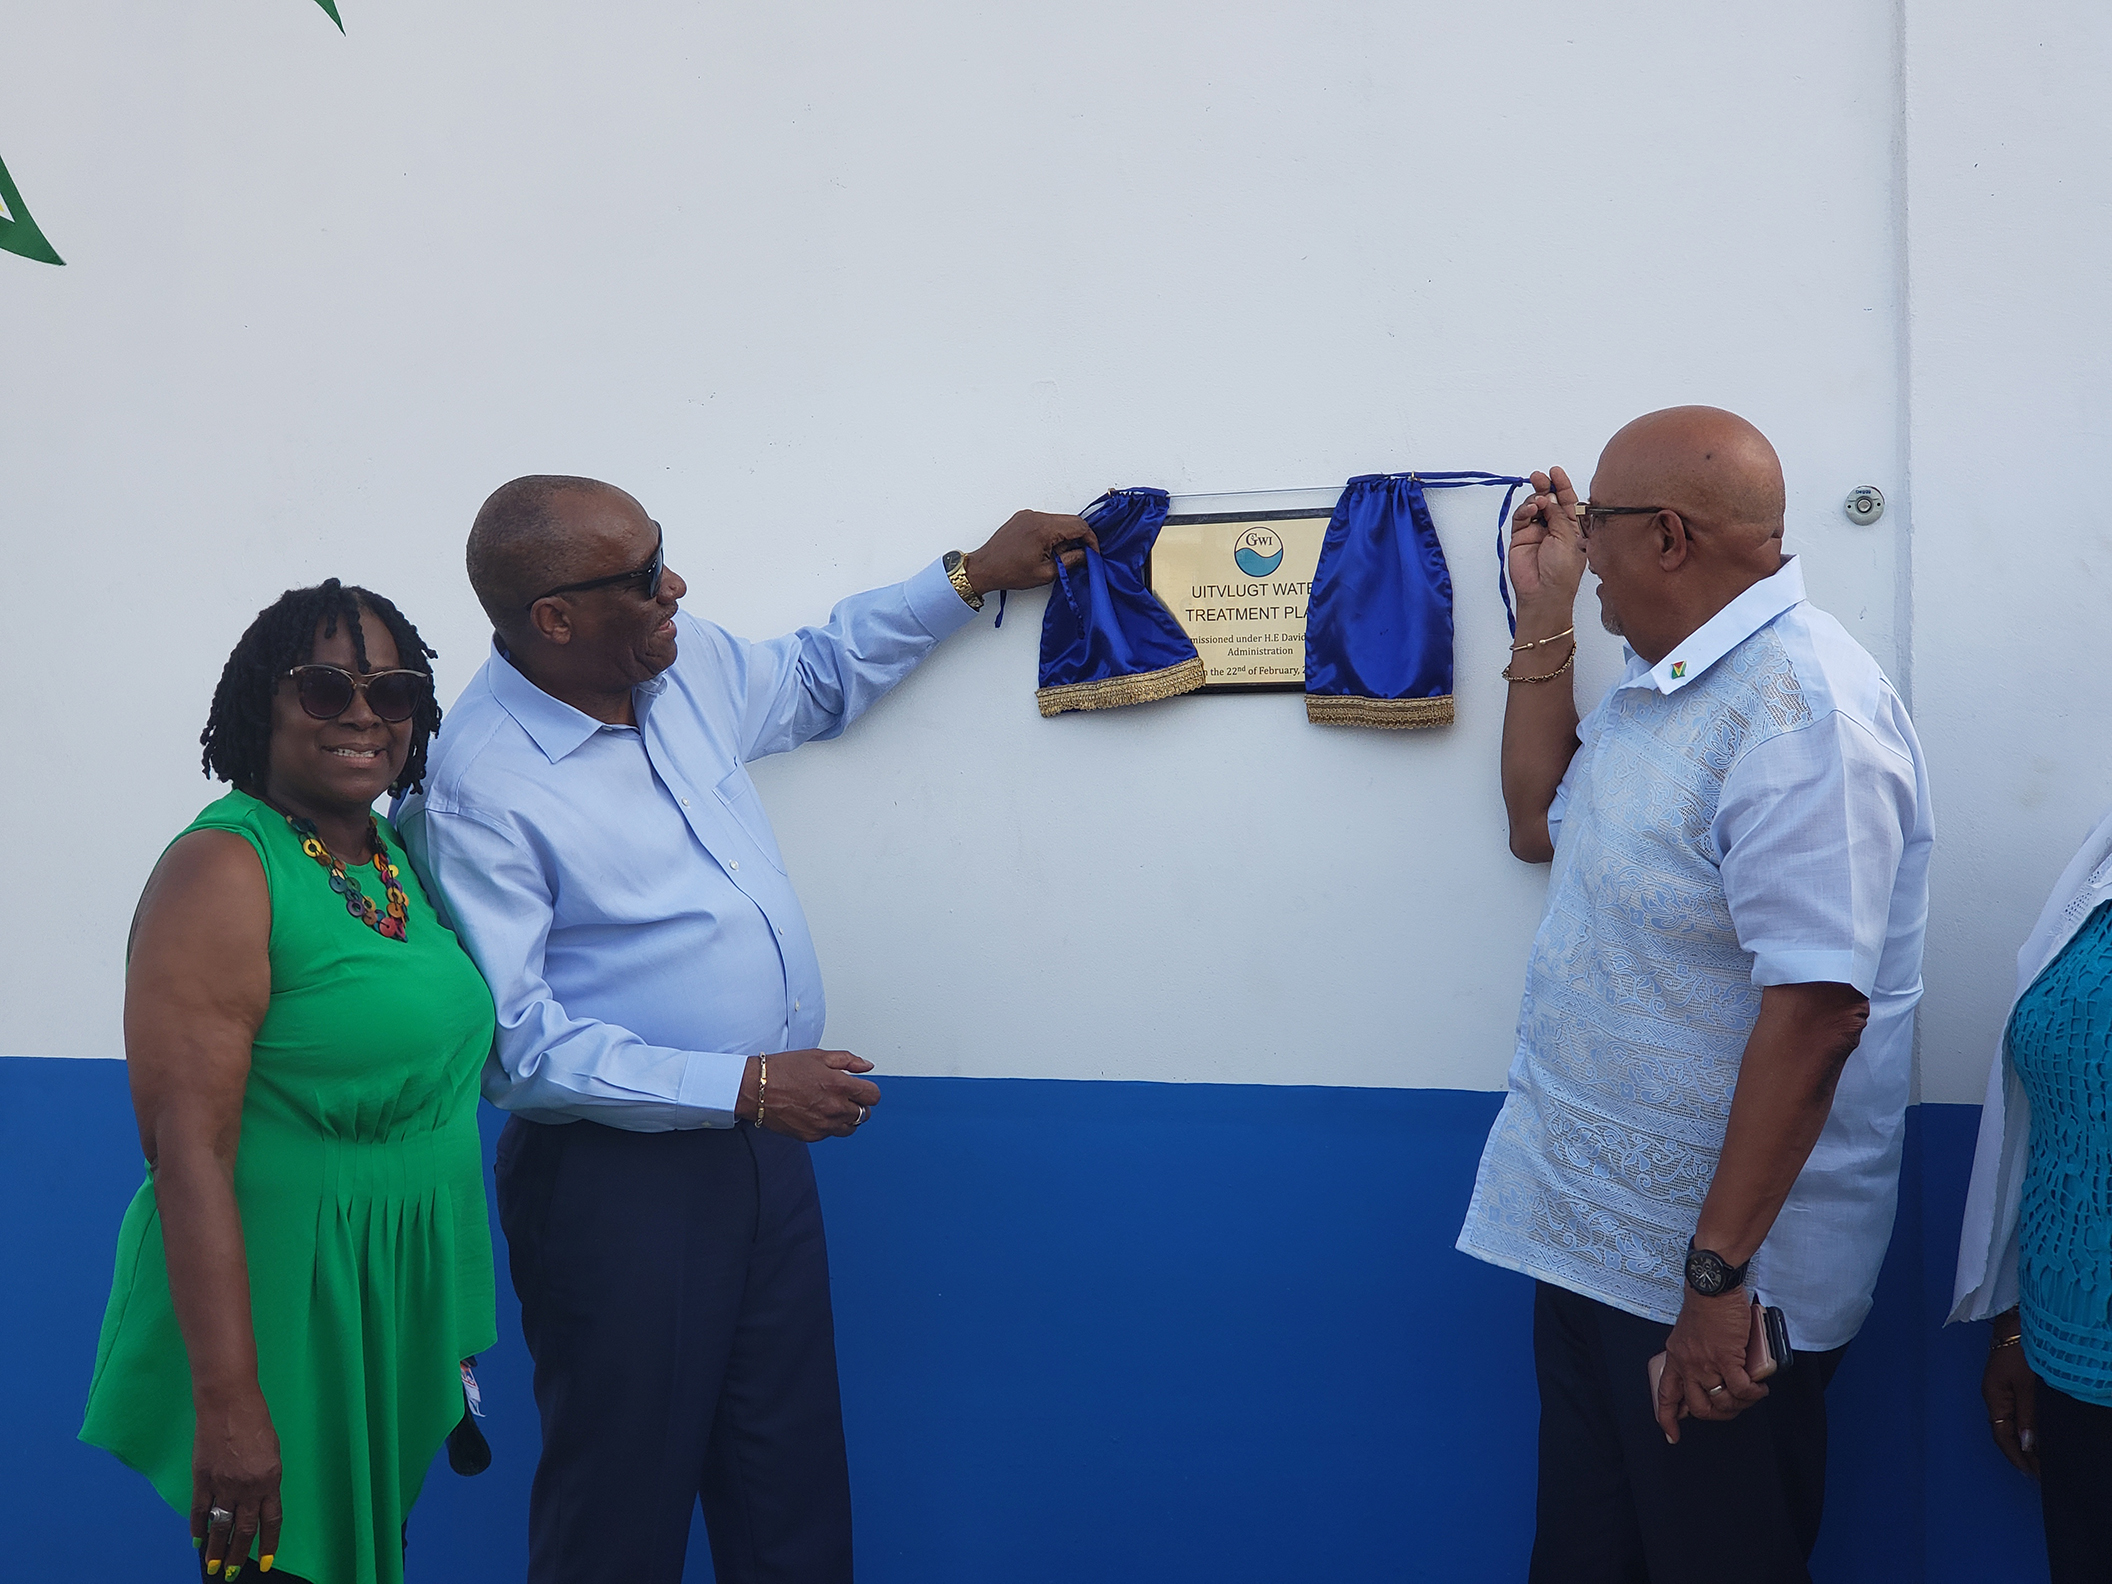 Director General of Ministry of the Presidency Joseph Harmon and Managing Director of GWI Dr Richard Van West-Charles unveiling the plaque at the commissioning of the Uitvlugt water treatment plant